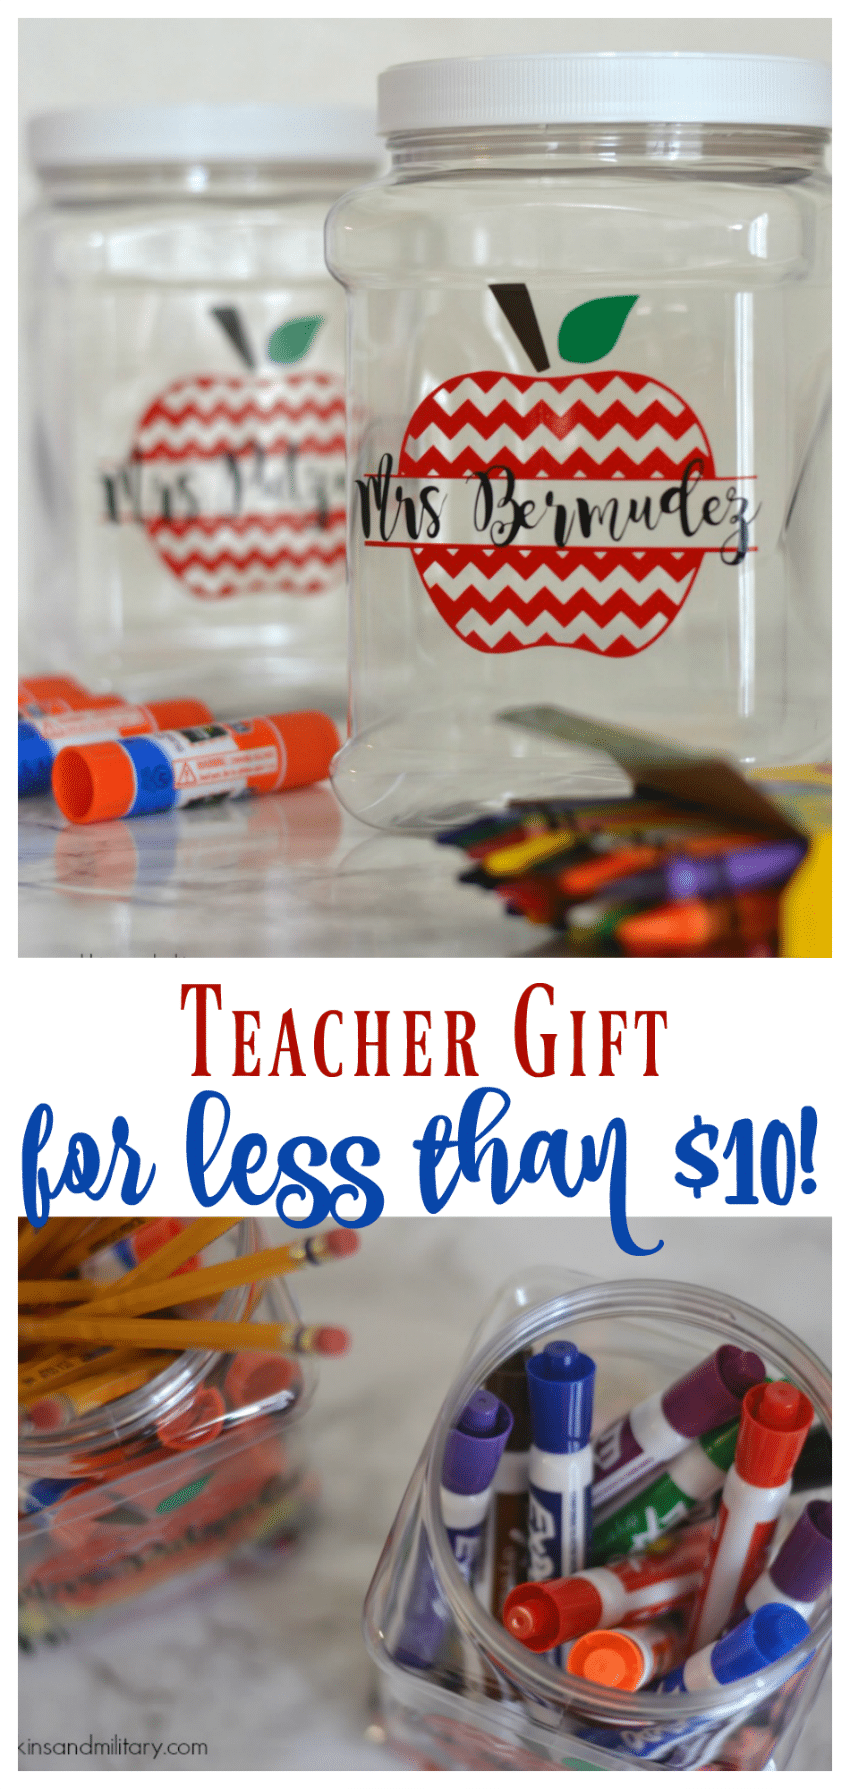 Gift idea that teachers will LOVE for under $10!